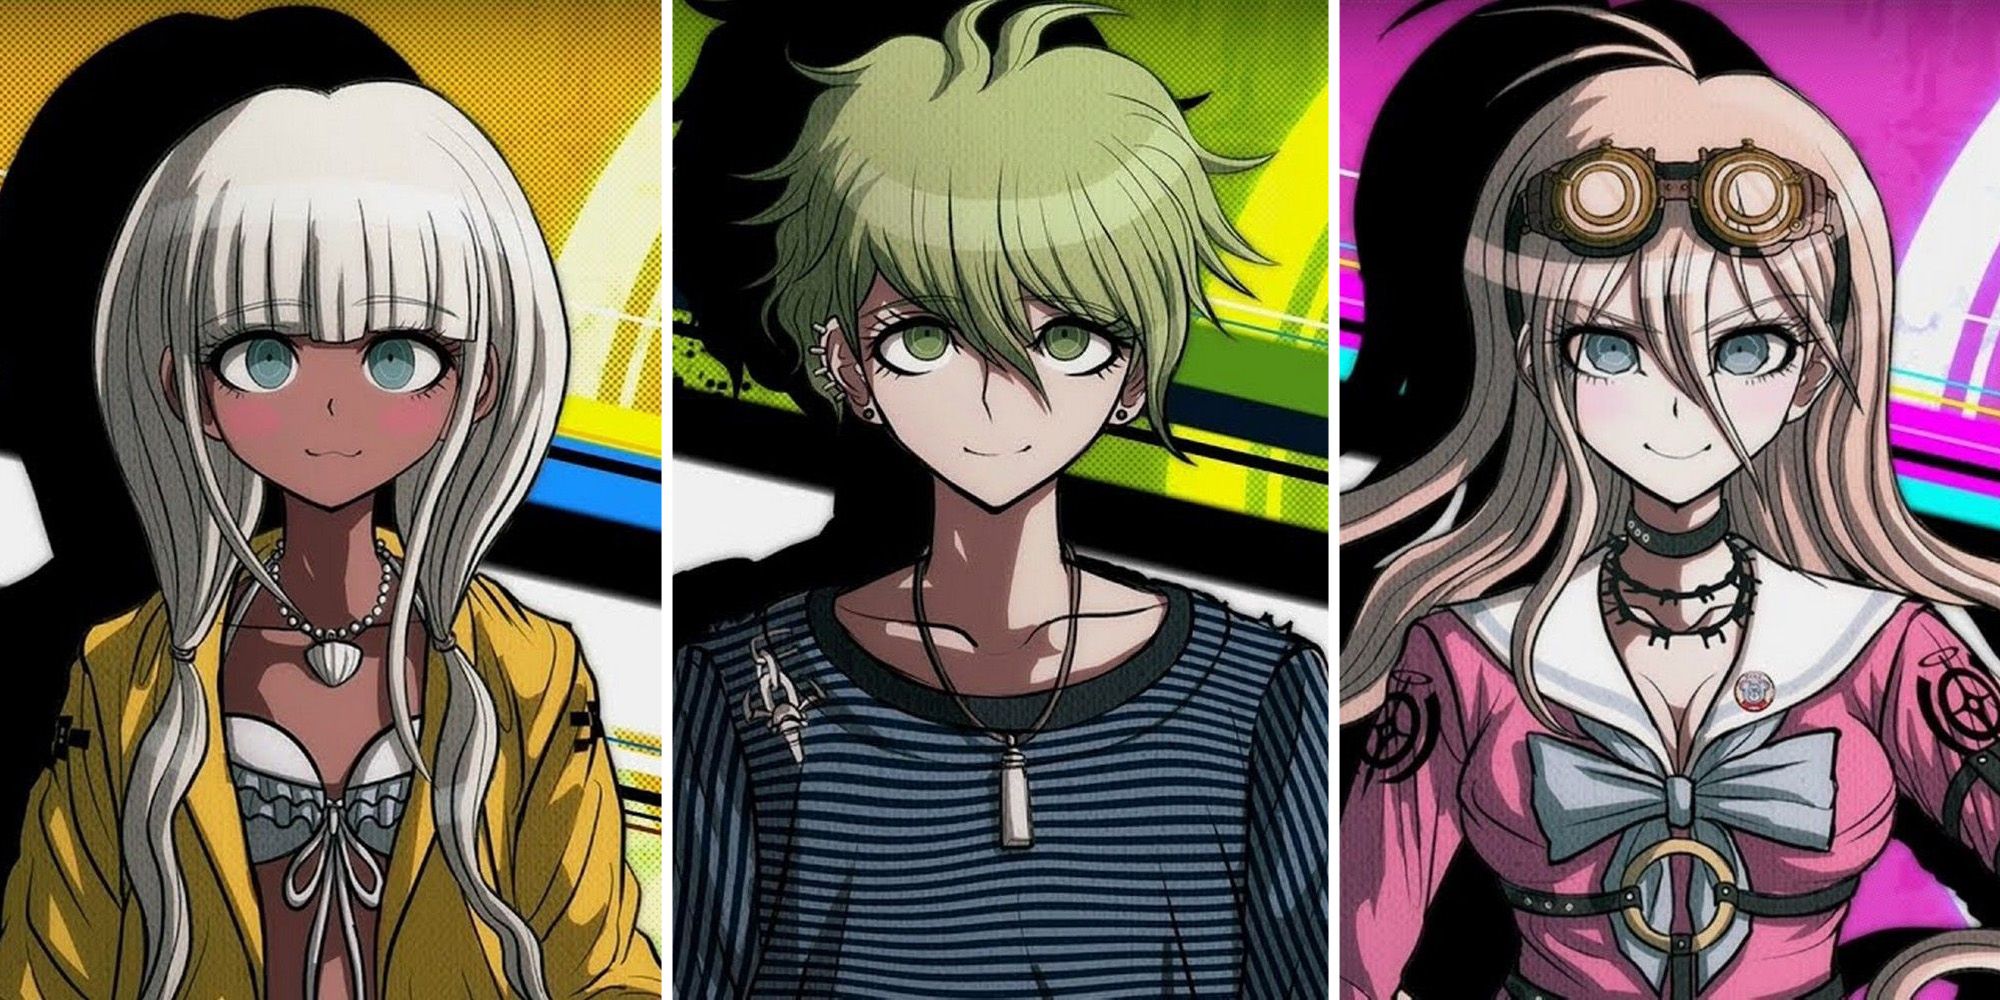 Danganronpa V3 Wildest Murders Feature Image featuring Angie, Rantaro, and Miu